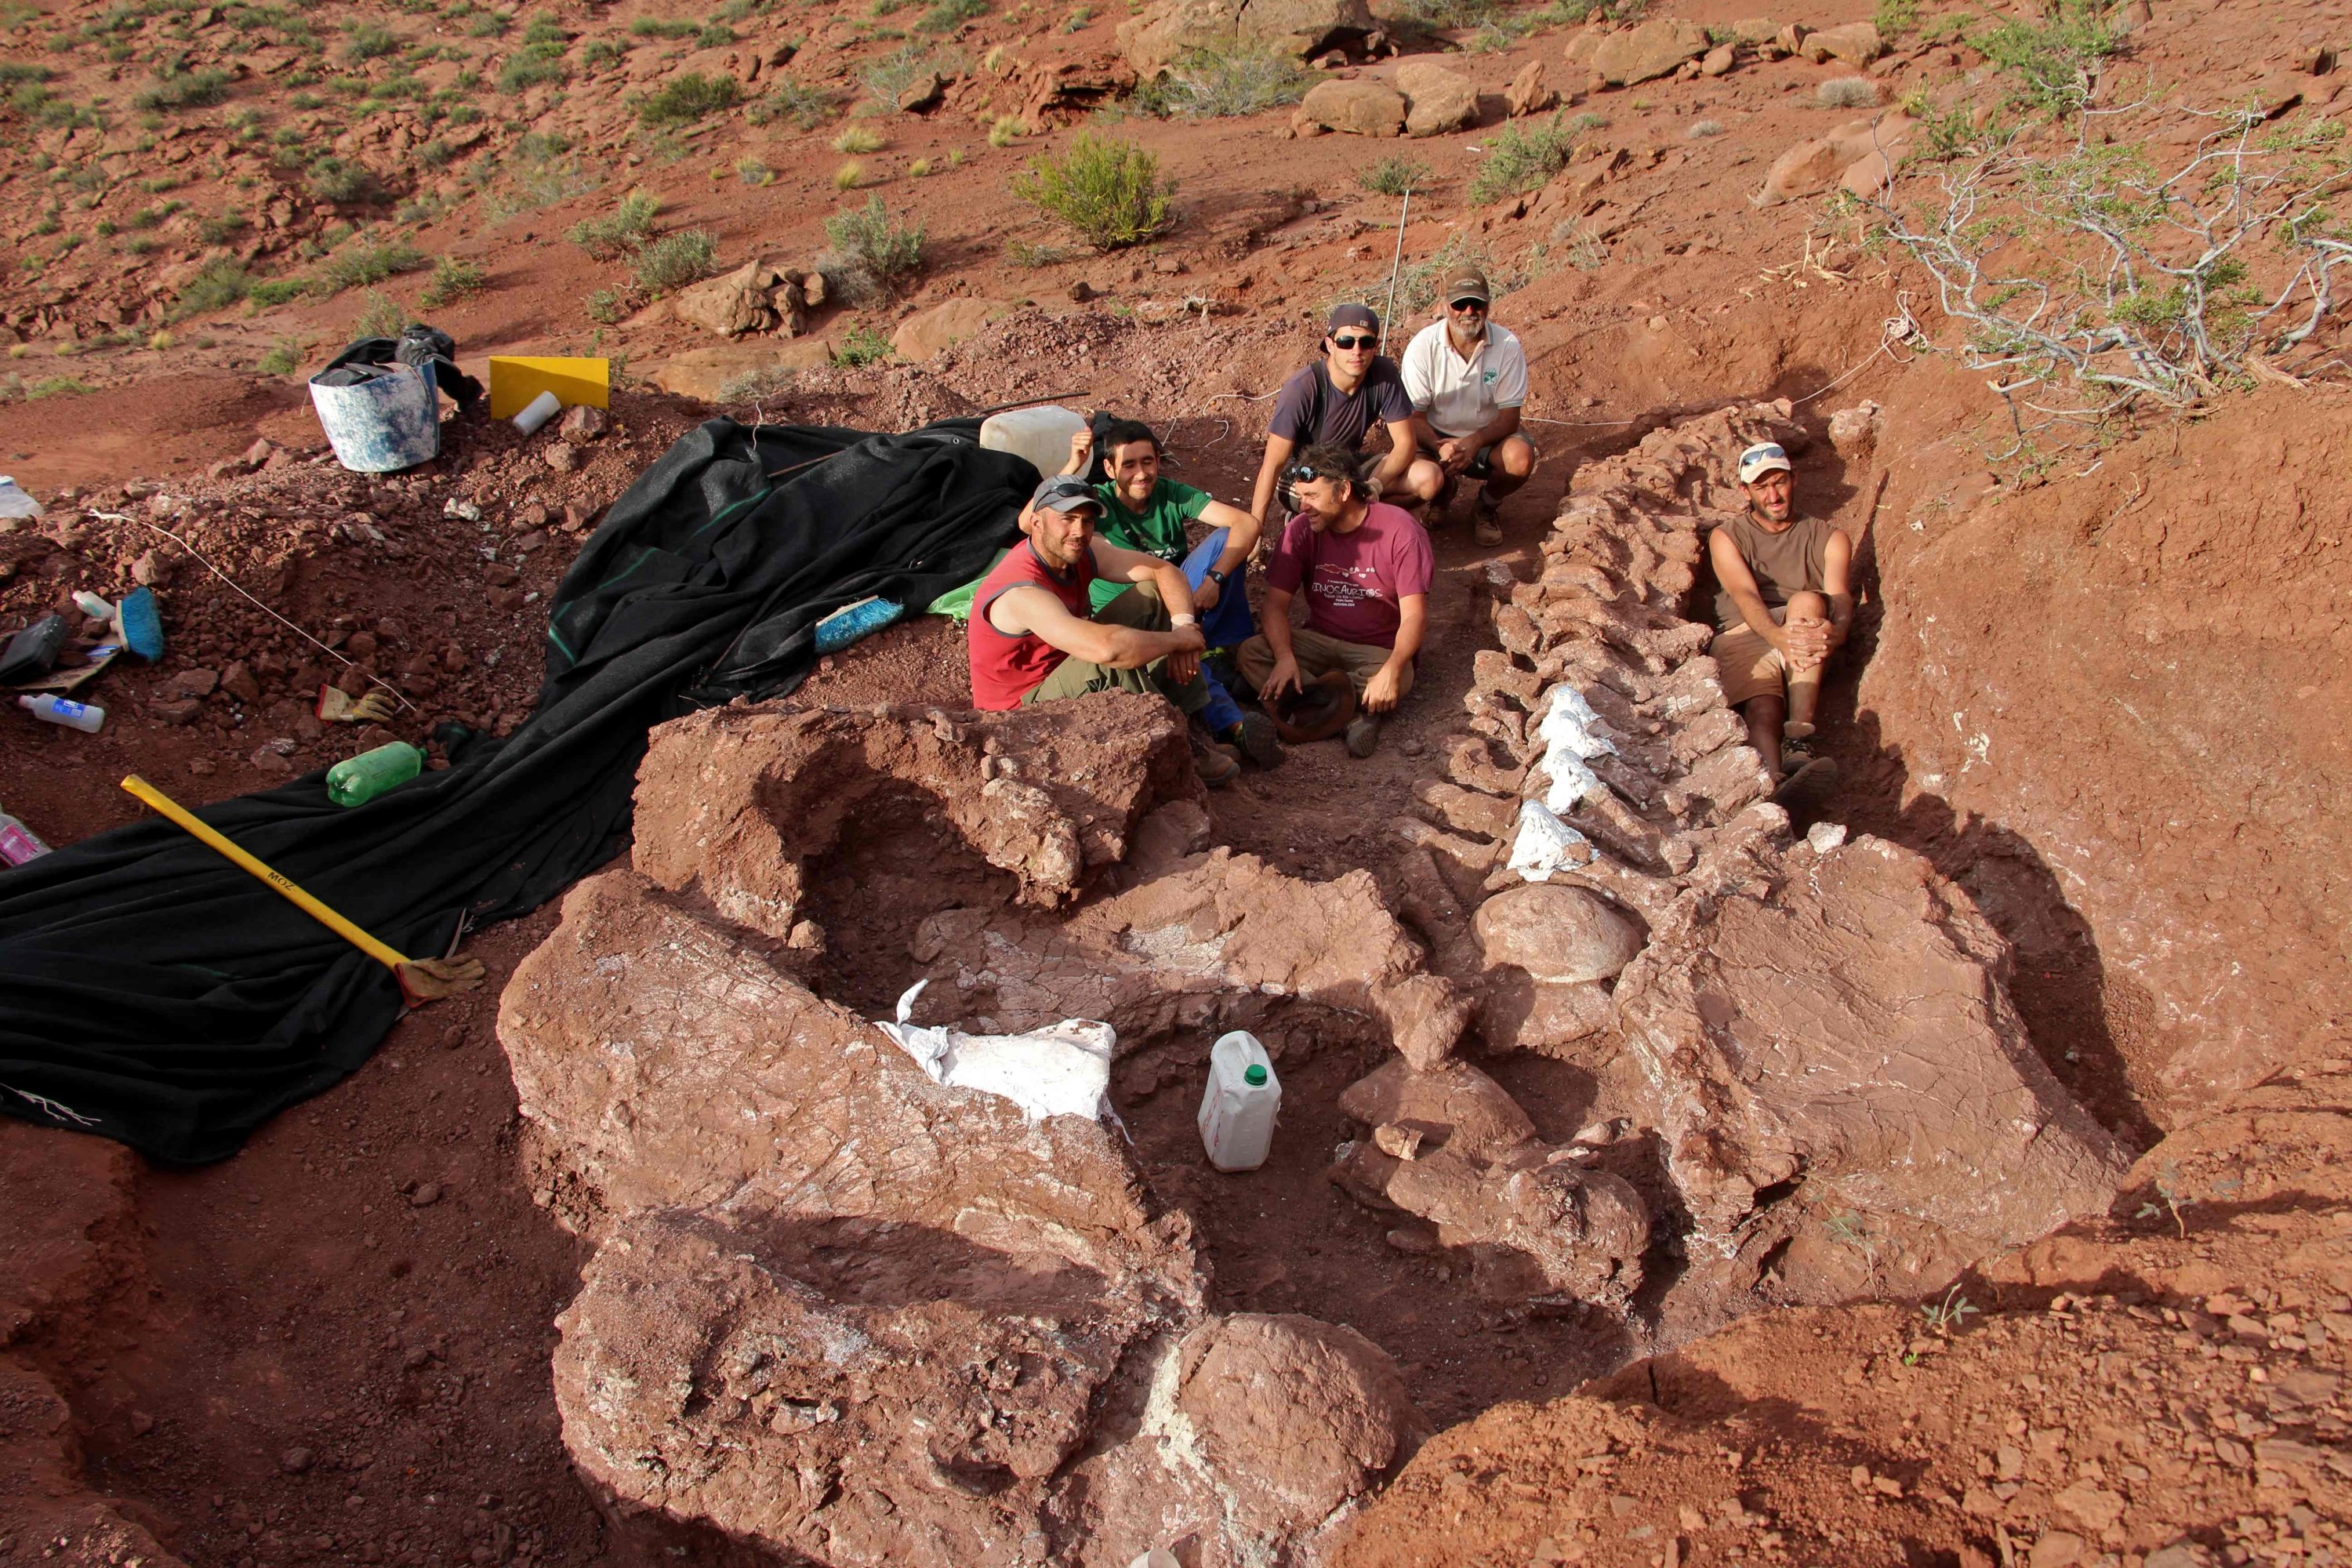 Dinosaur discovered in Argentina could be largest ever found | Daily Sabah